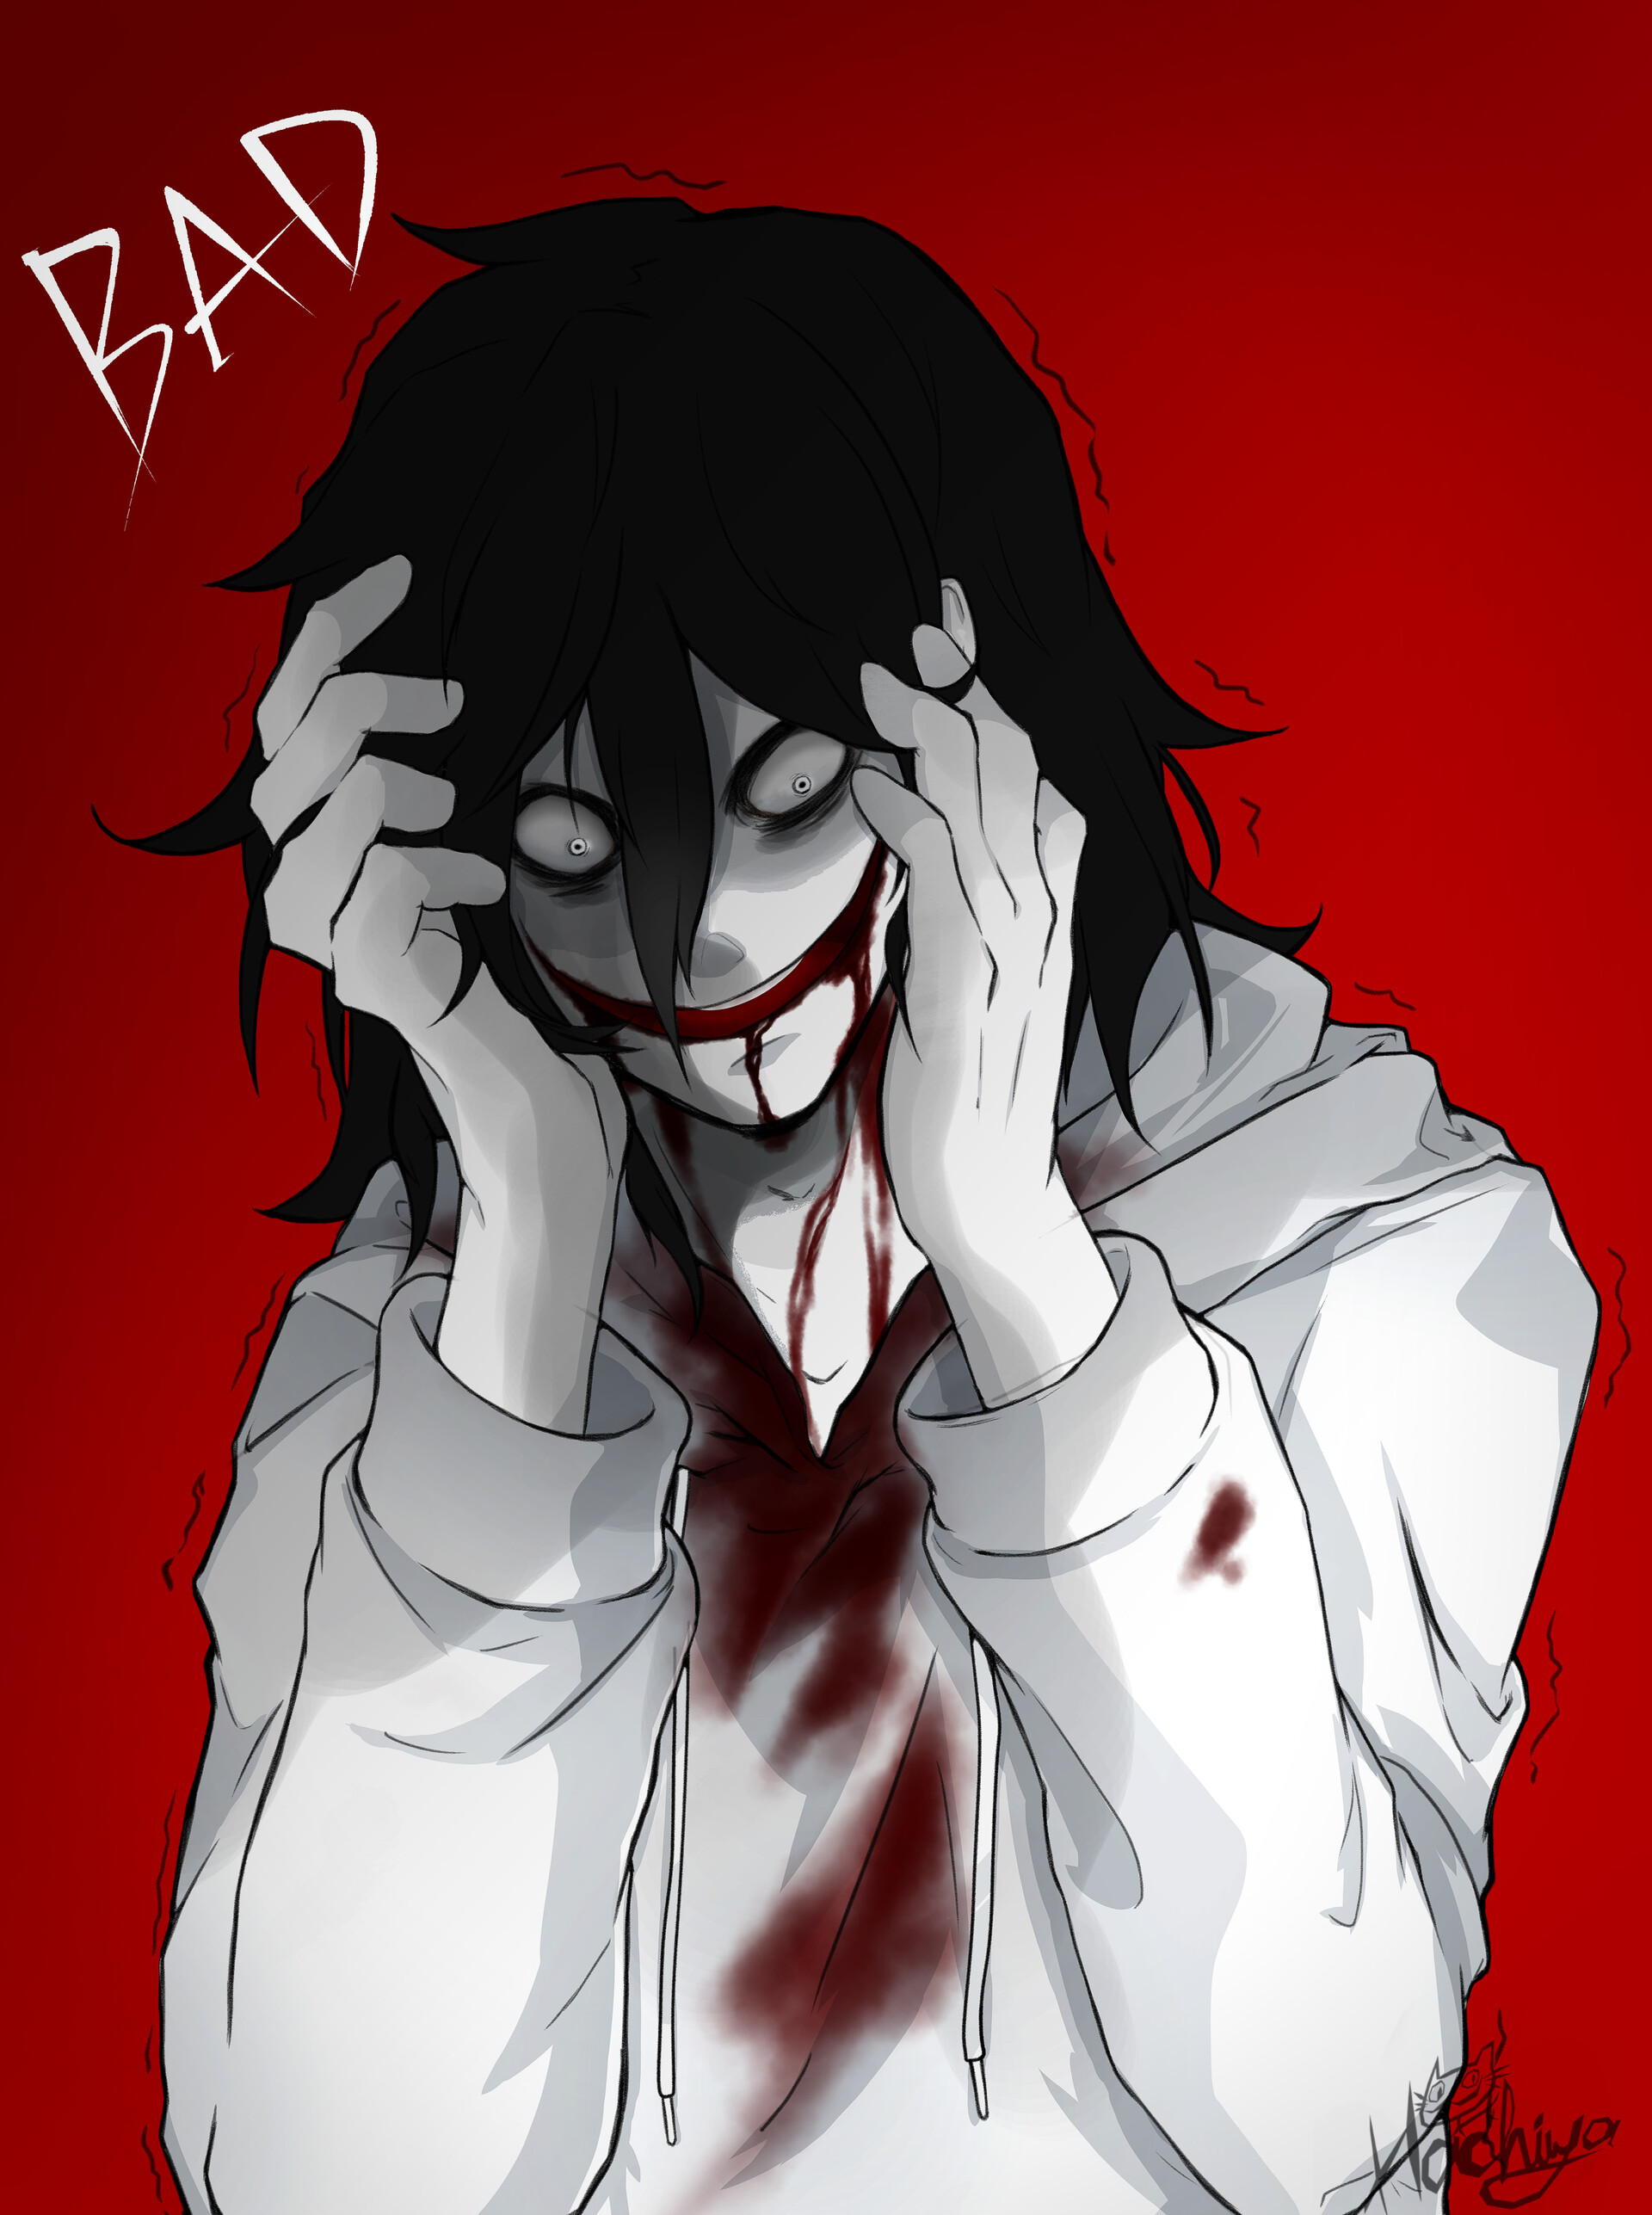 teyoid //🪻⚔️*.゜｡:+.゜｡* | Jeff the killer anime girl 🔪🐞👁️ I drew a  picture of that AI generated meme image derived from one of the OG creepy  pastas :pp ... | Instagram